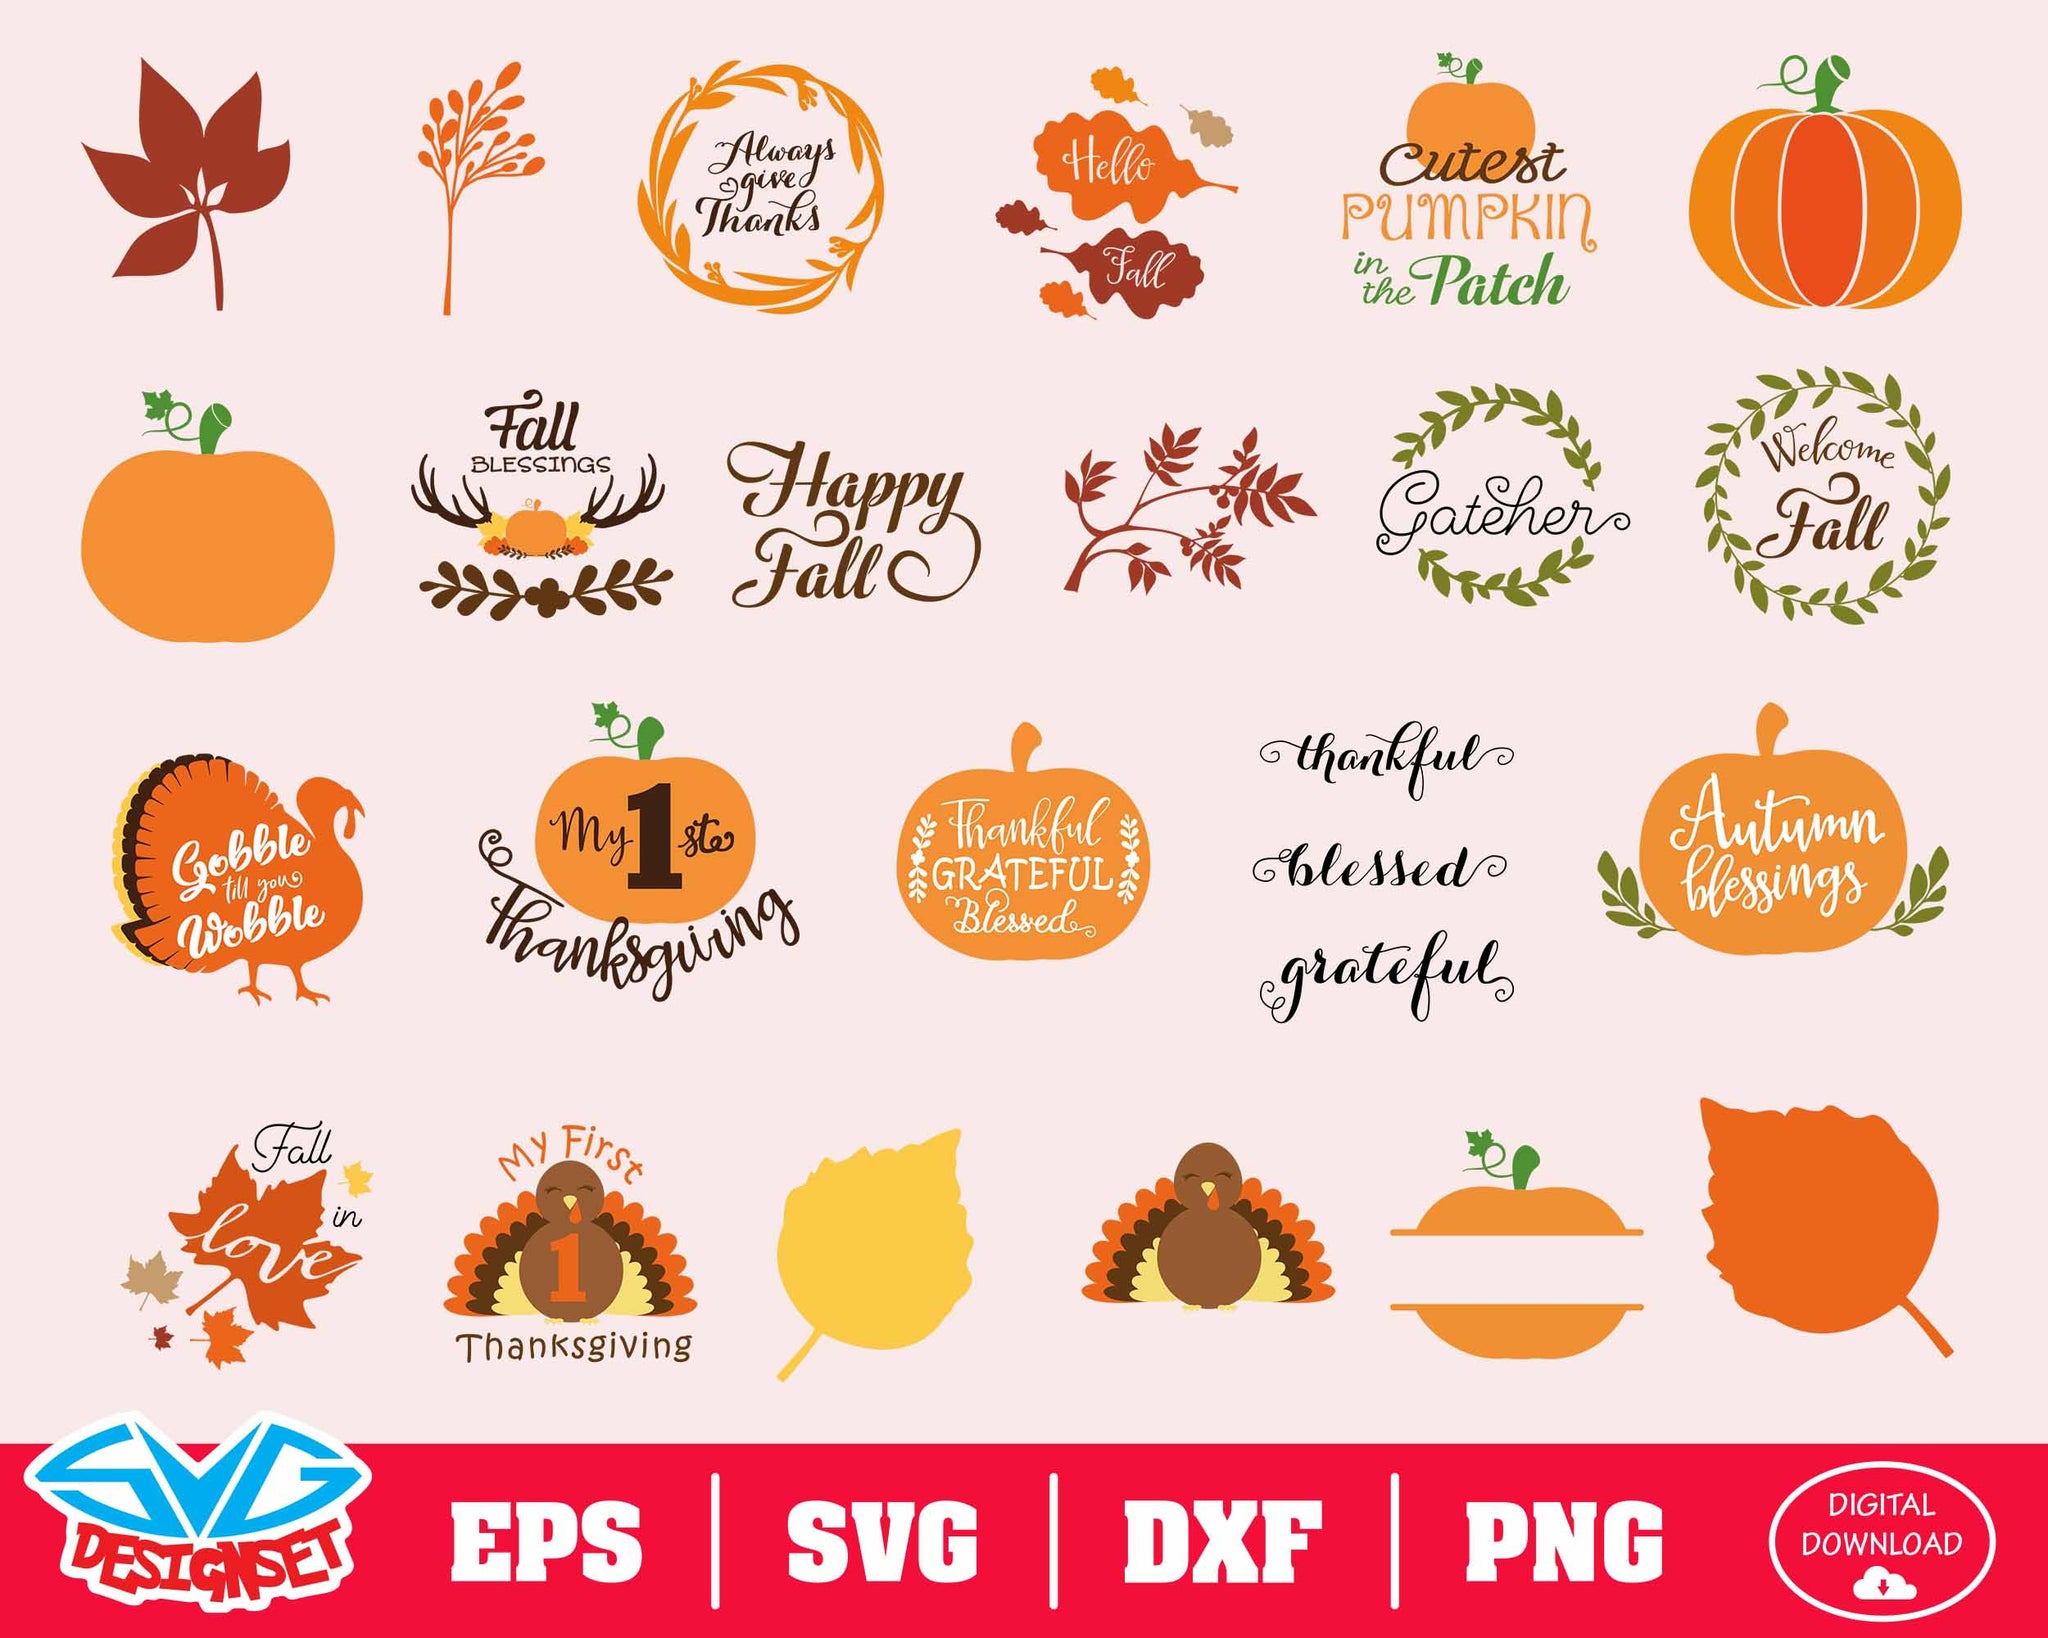 Thanksgiving Svg, Dxf, Eps, Png, Clipart, Silhouette and Cutfiles #3 - SVGDesignSets